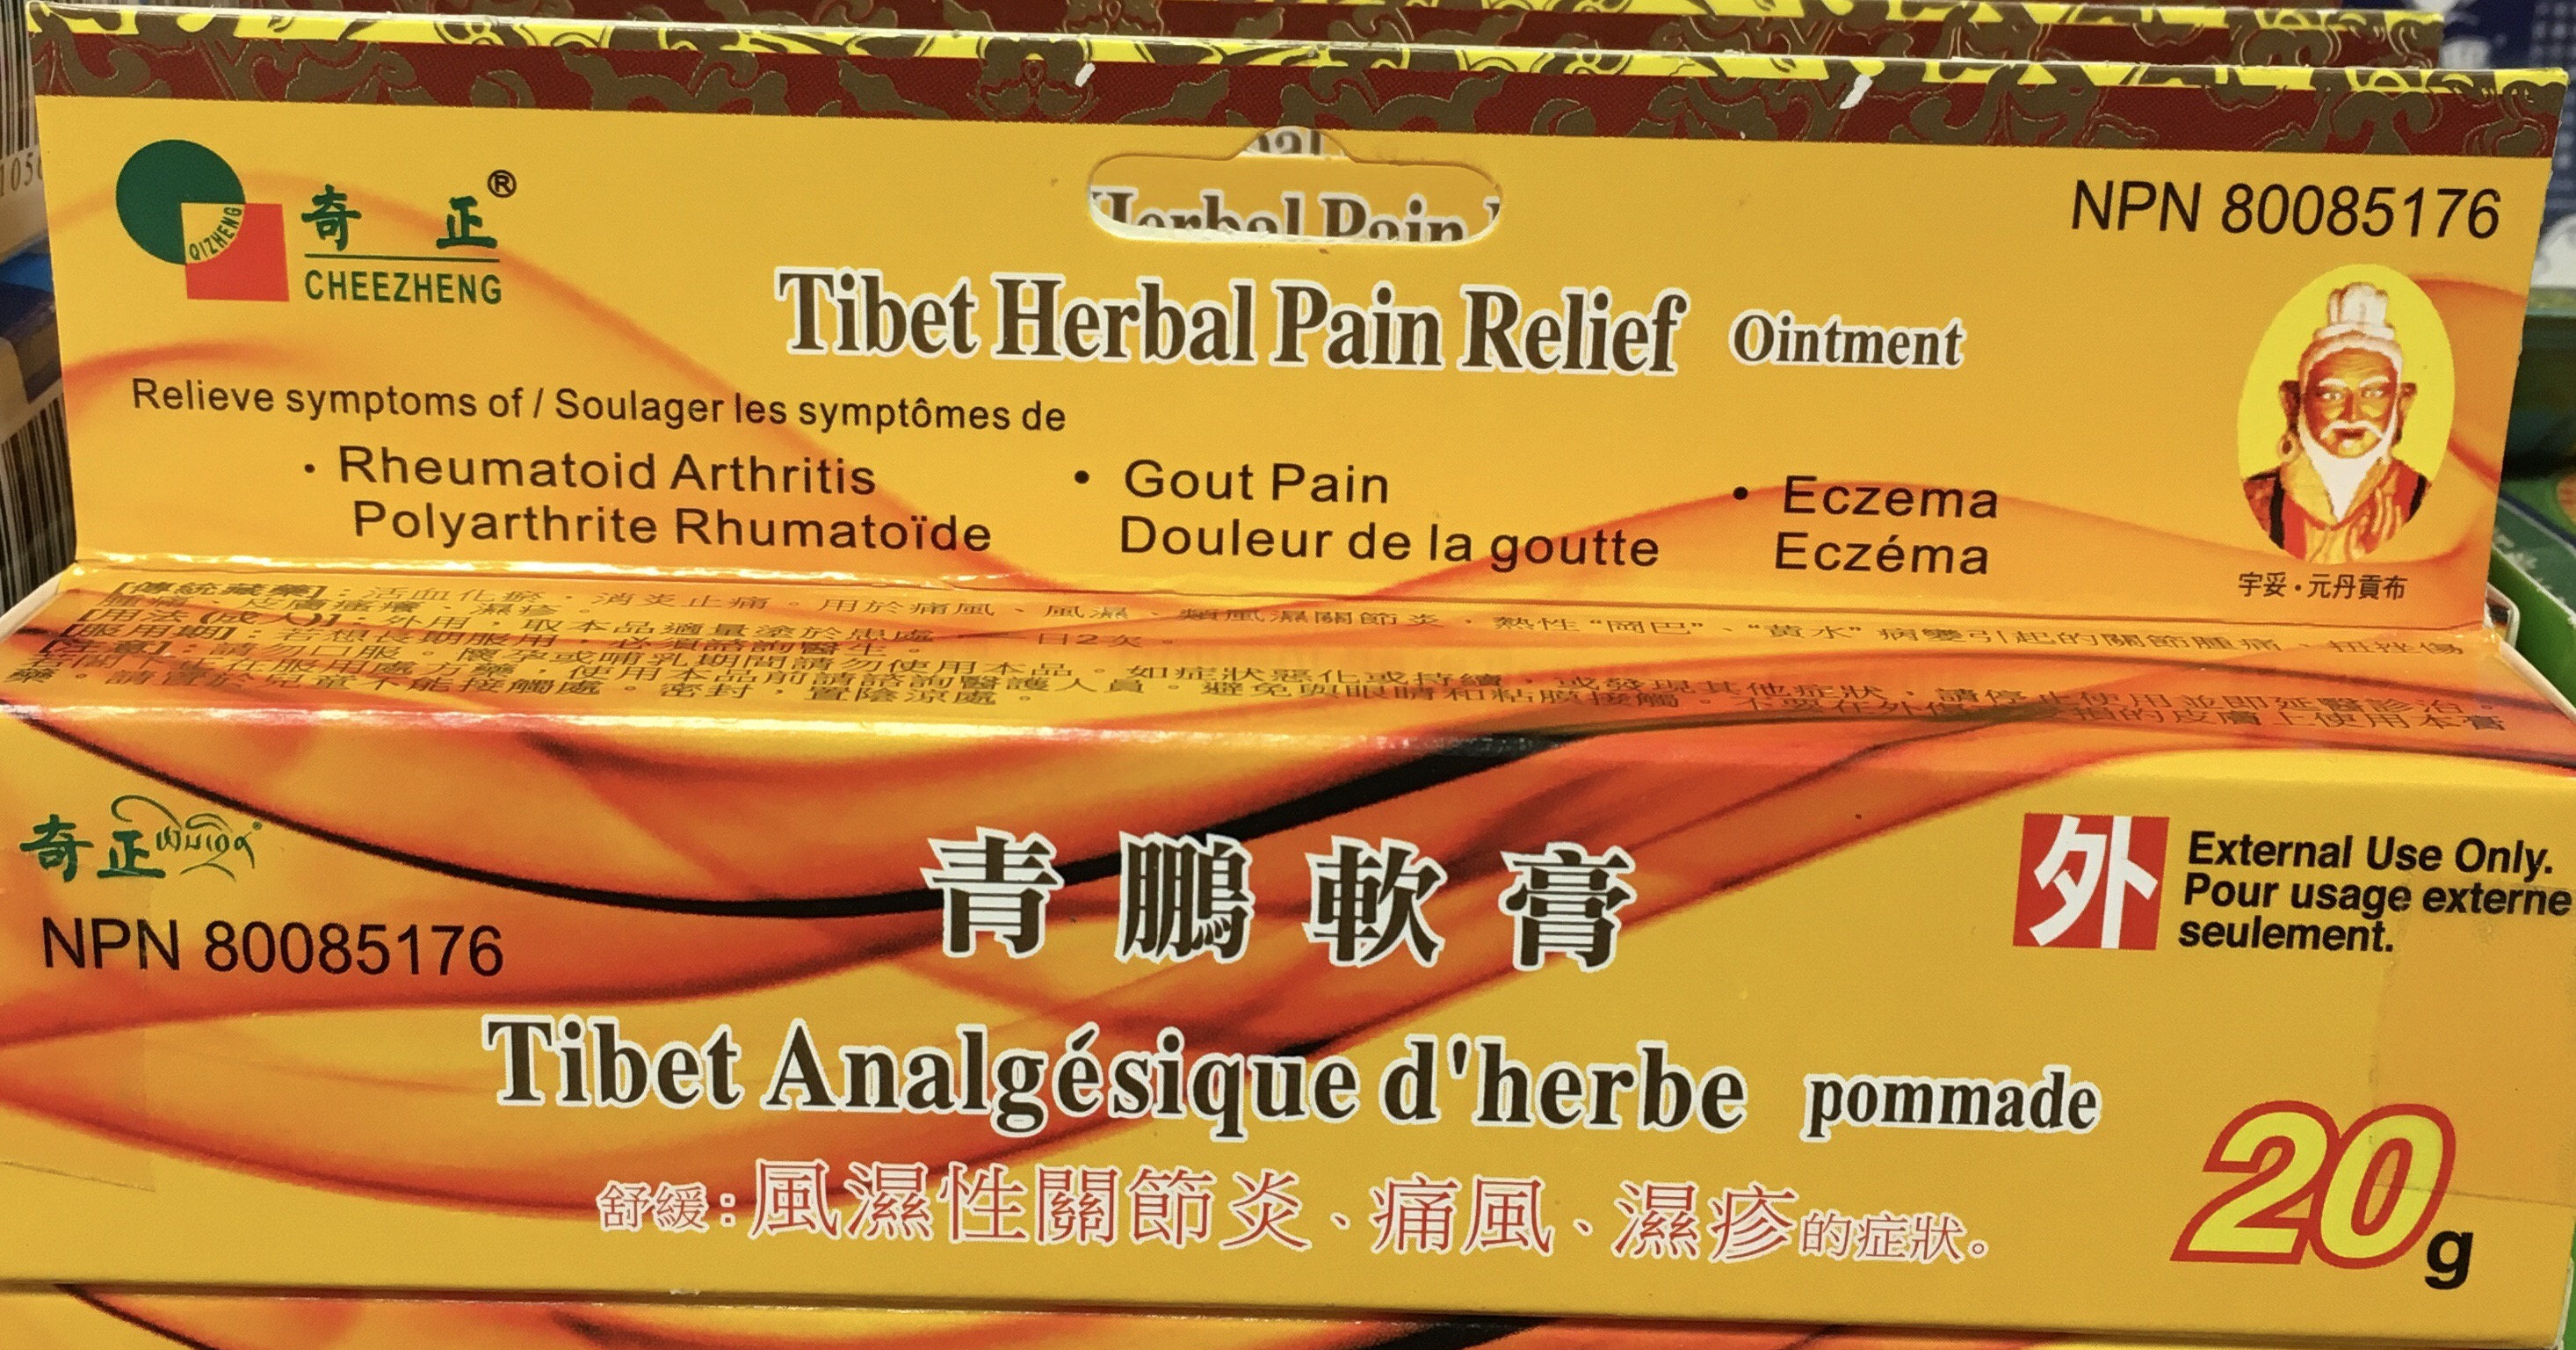 Tibet Herbal Pain Relief Ointment